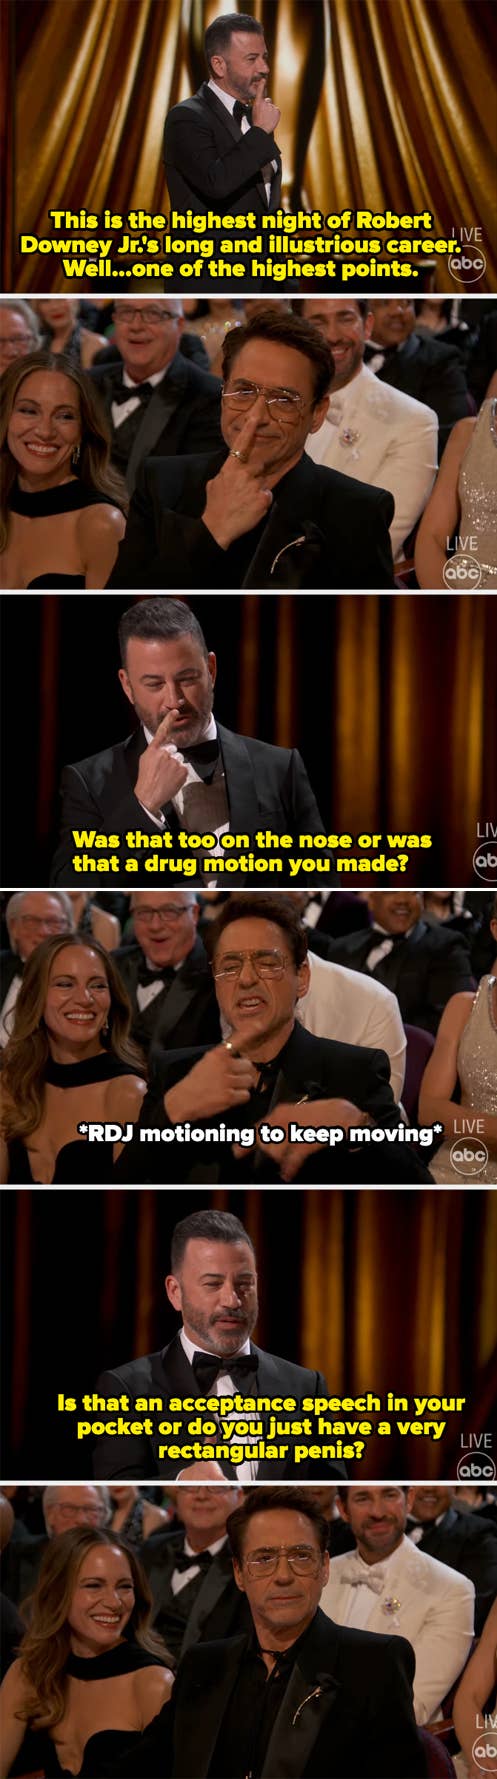 Screenshots from the Oscars